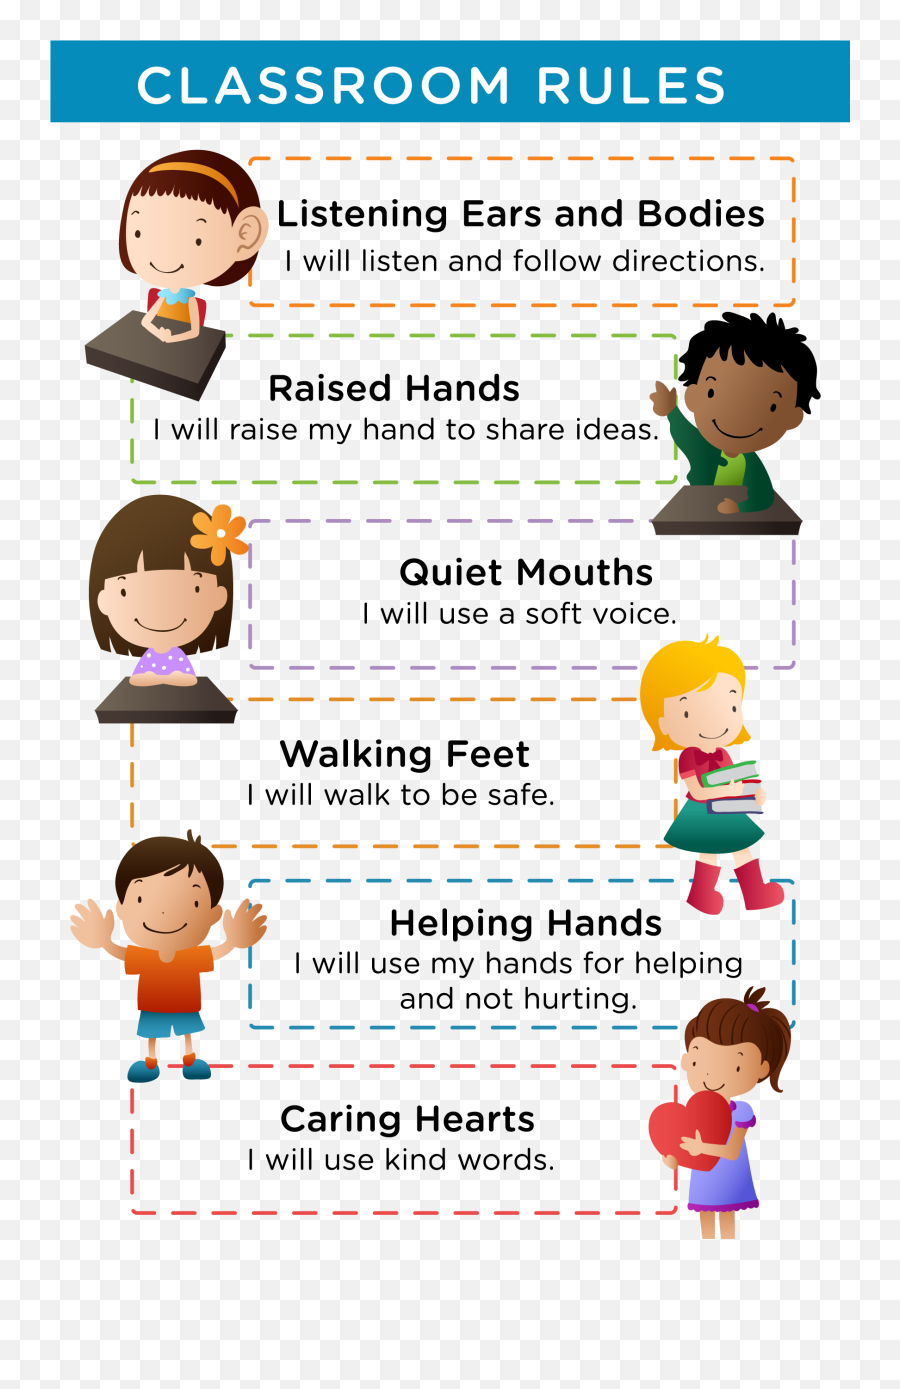 Bad Manners In Classroom - 1728x2592 Png Clipart Download Classroom Manners For Kids,Classroom Png